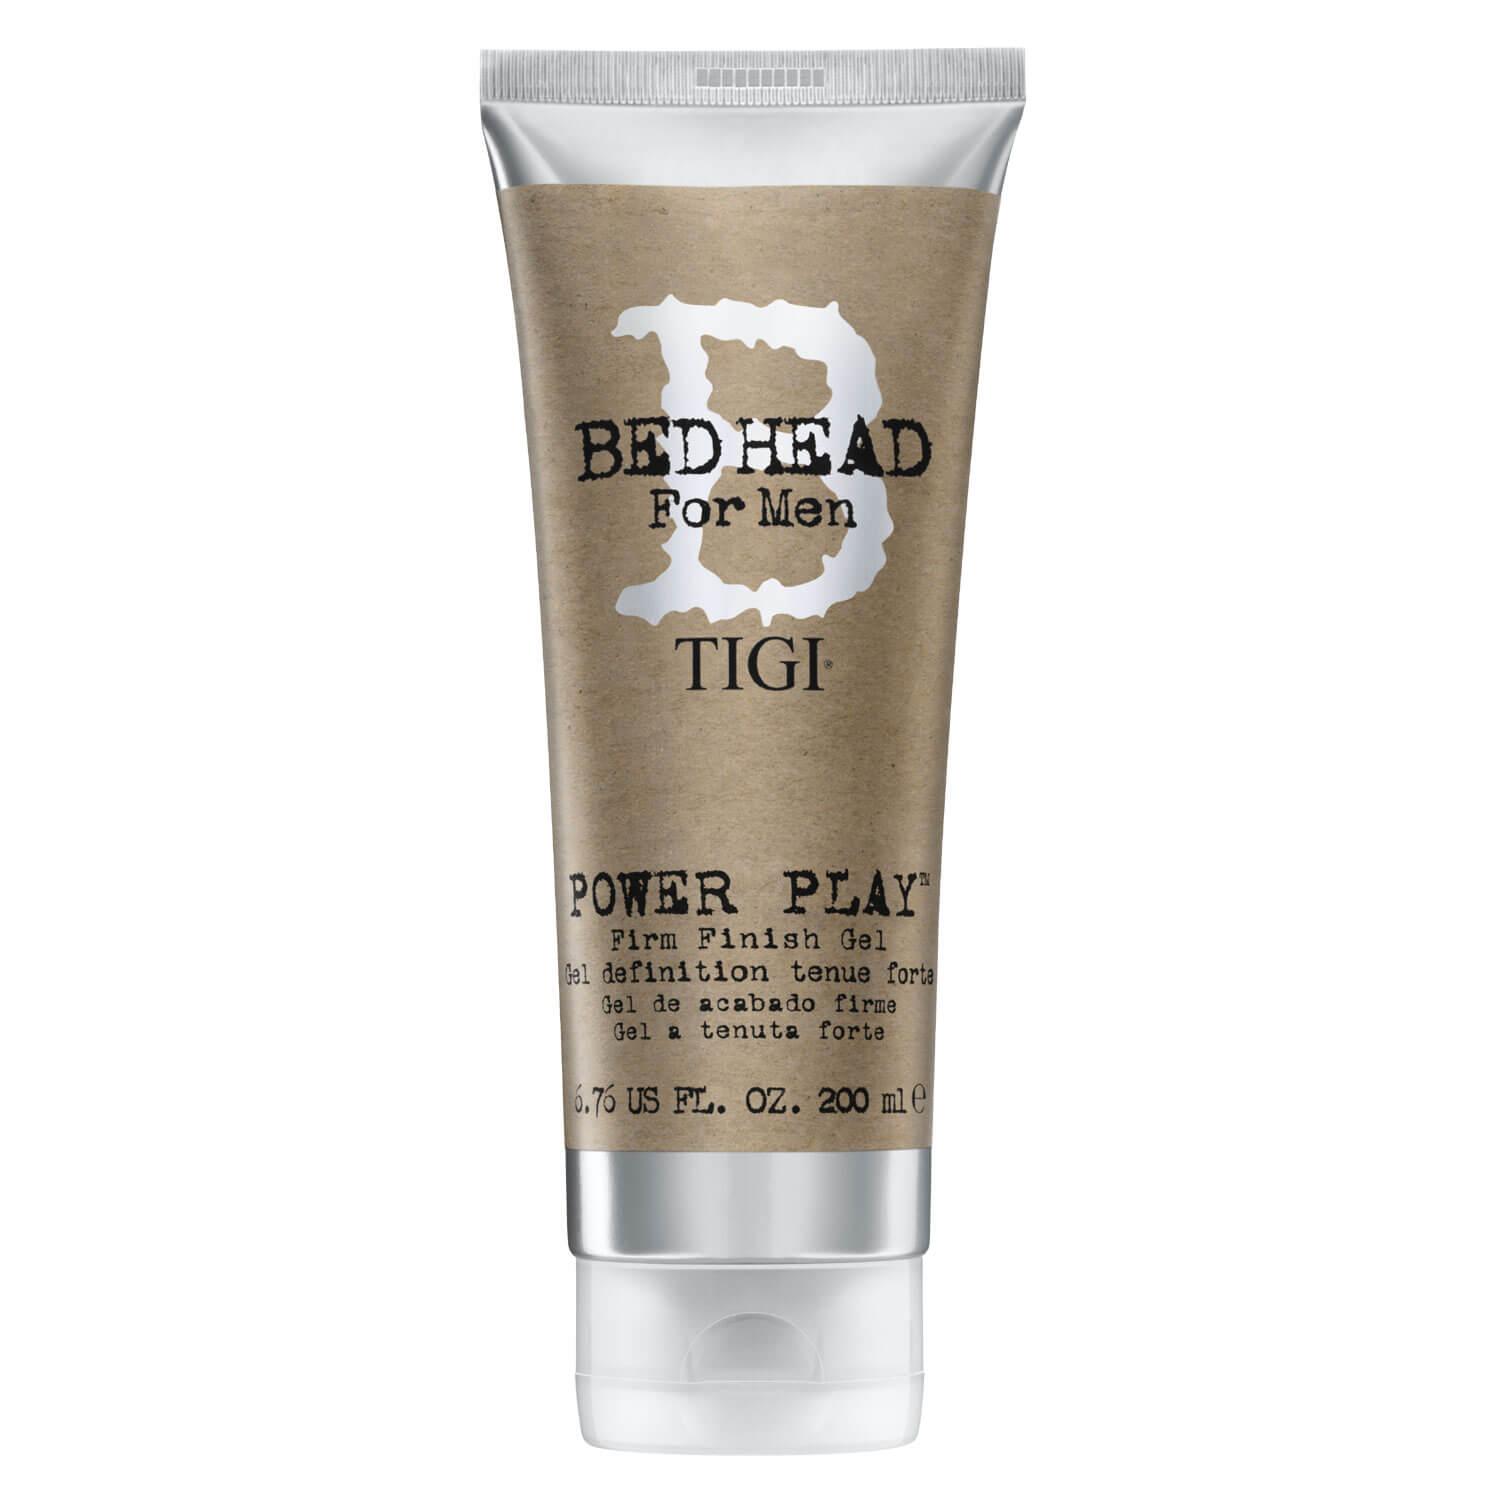 Bed Head For Men - Power Play NEW